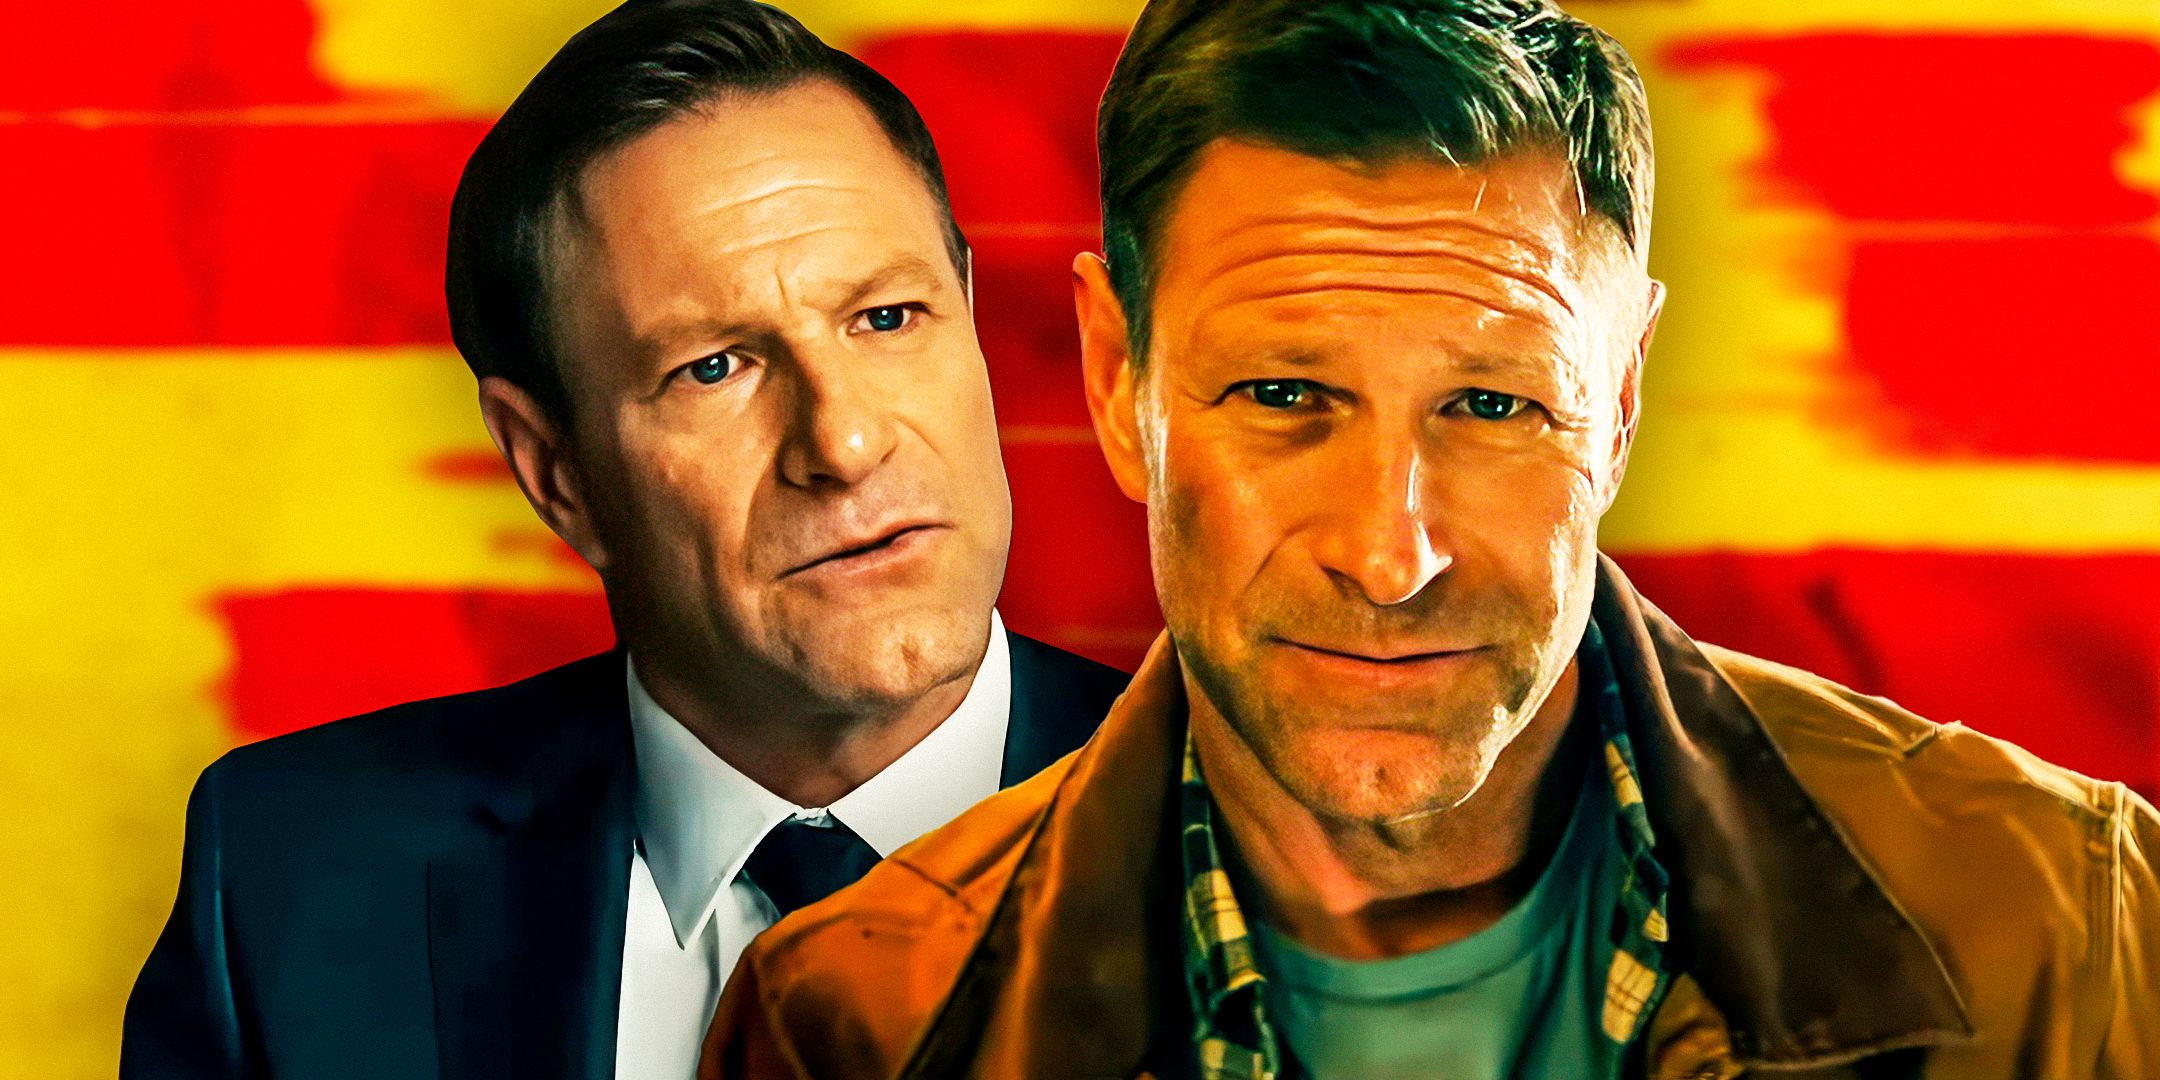 Aaron Eckhart as Benjamin Malloy in Chief of Station and Eckhart smiling as Steve Vail from The Bricklayer